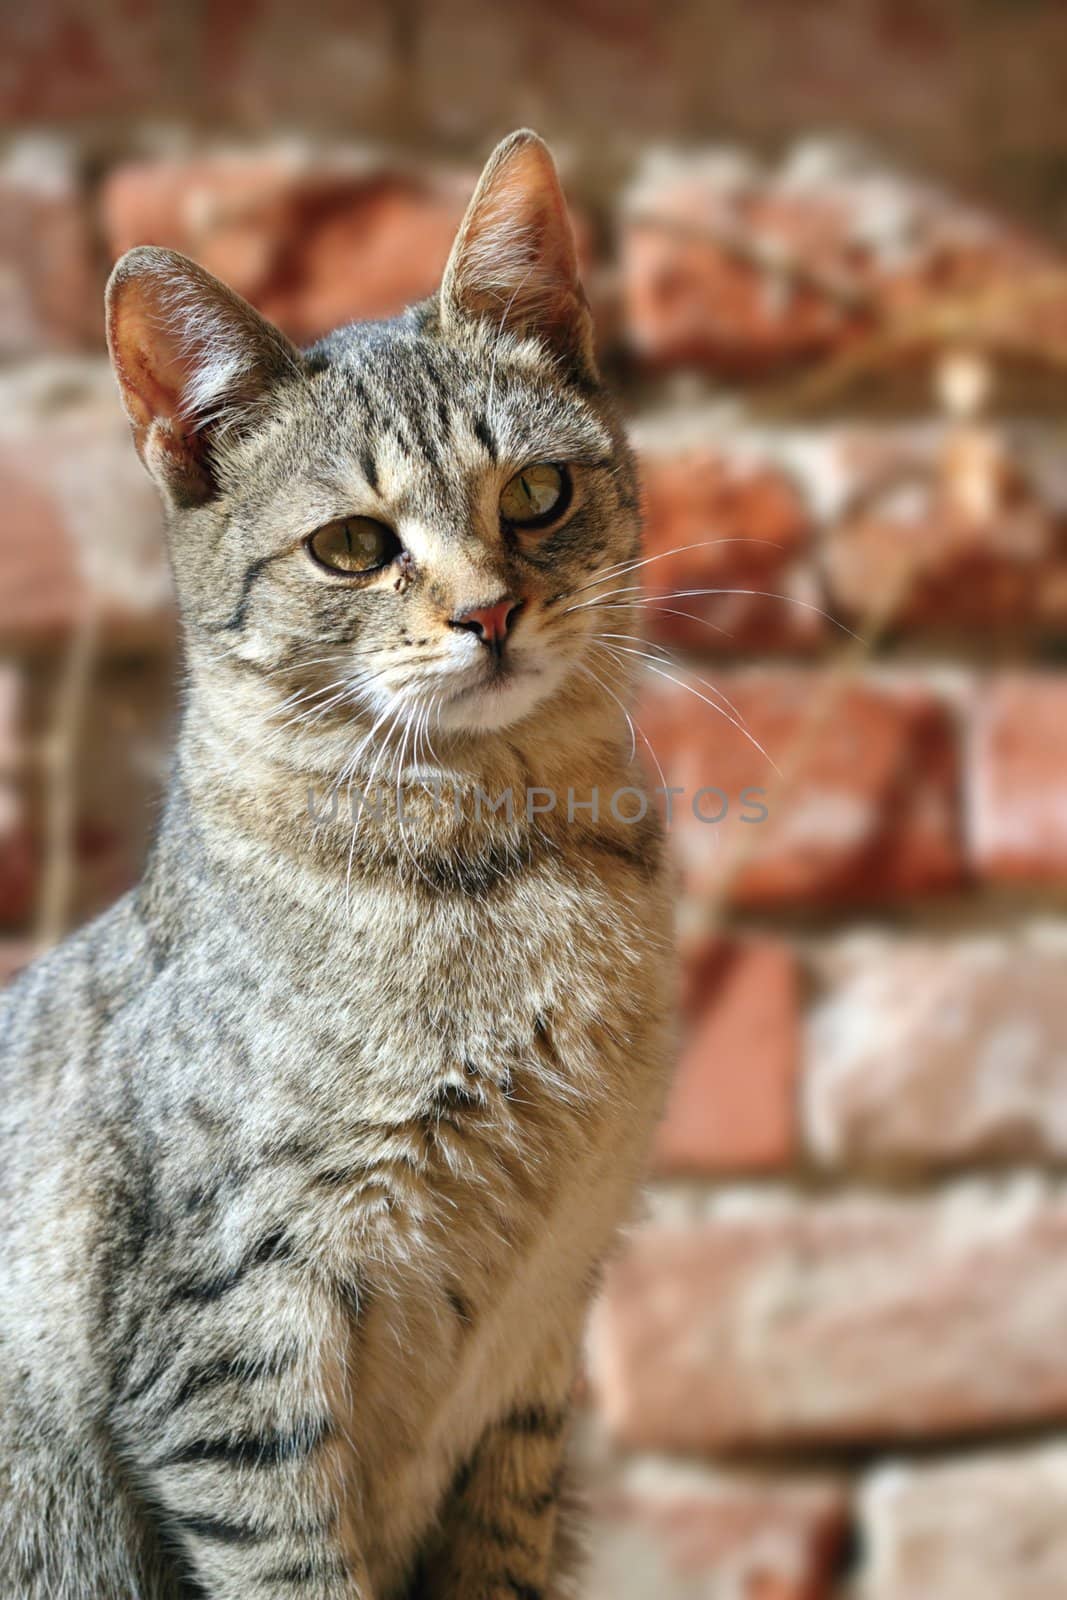 curious striped cat over brick wall background